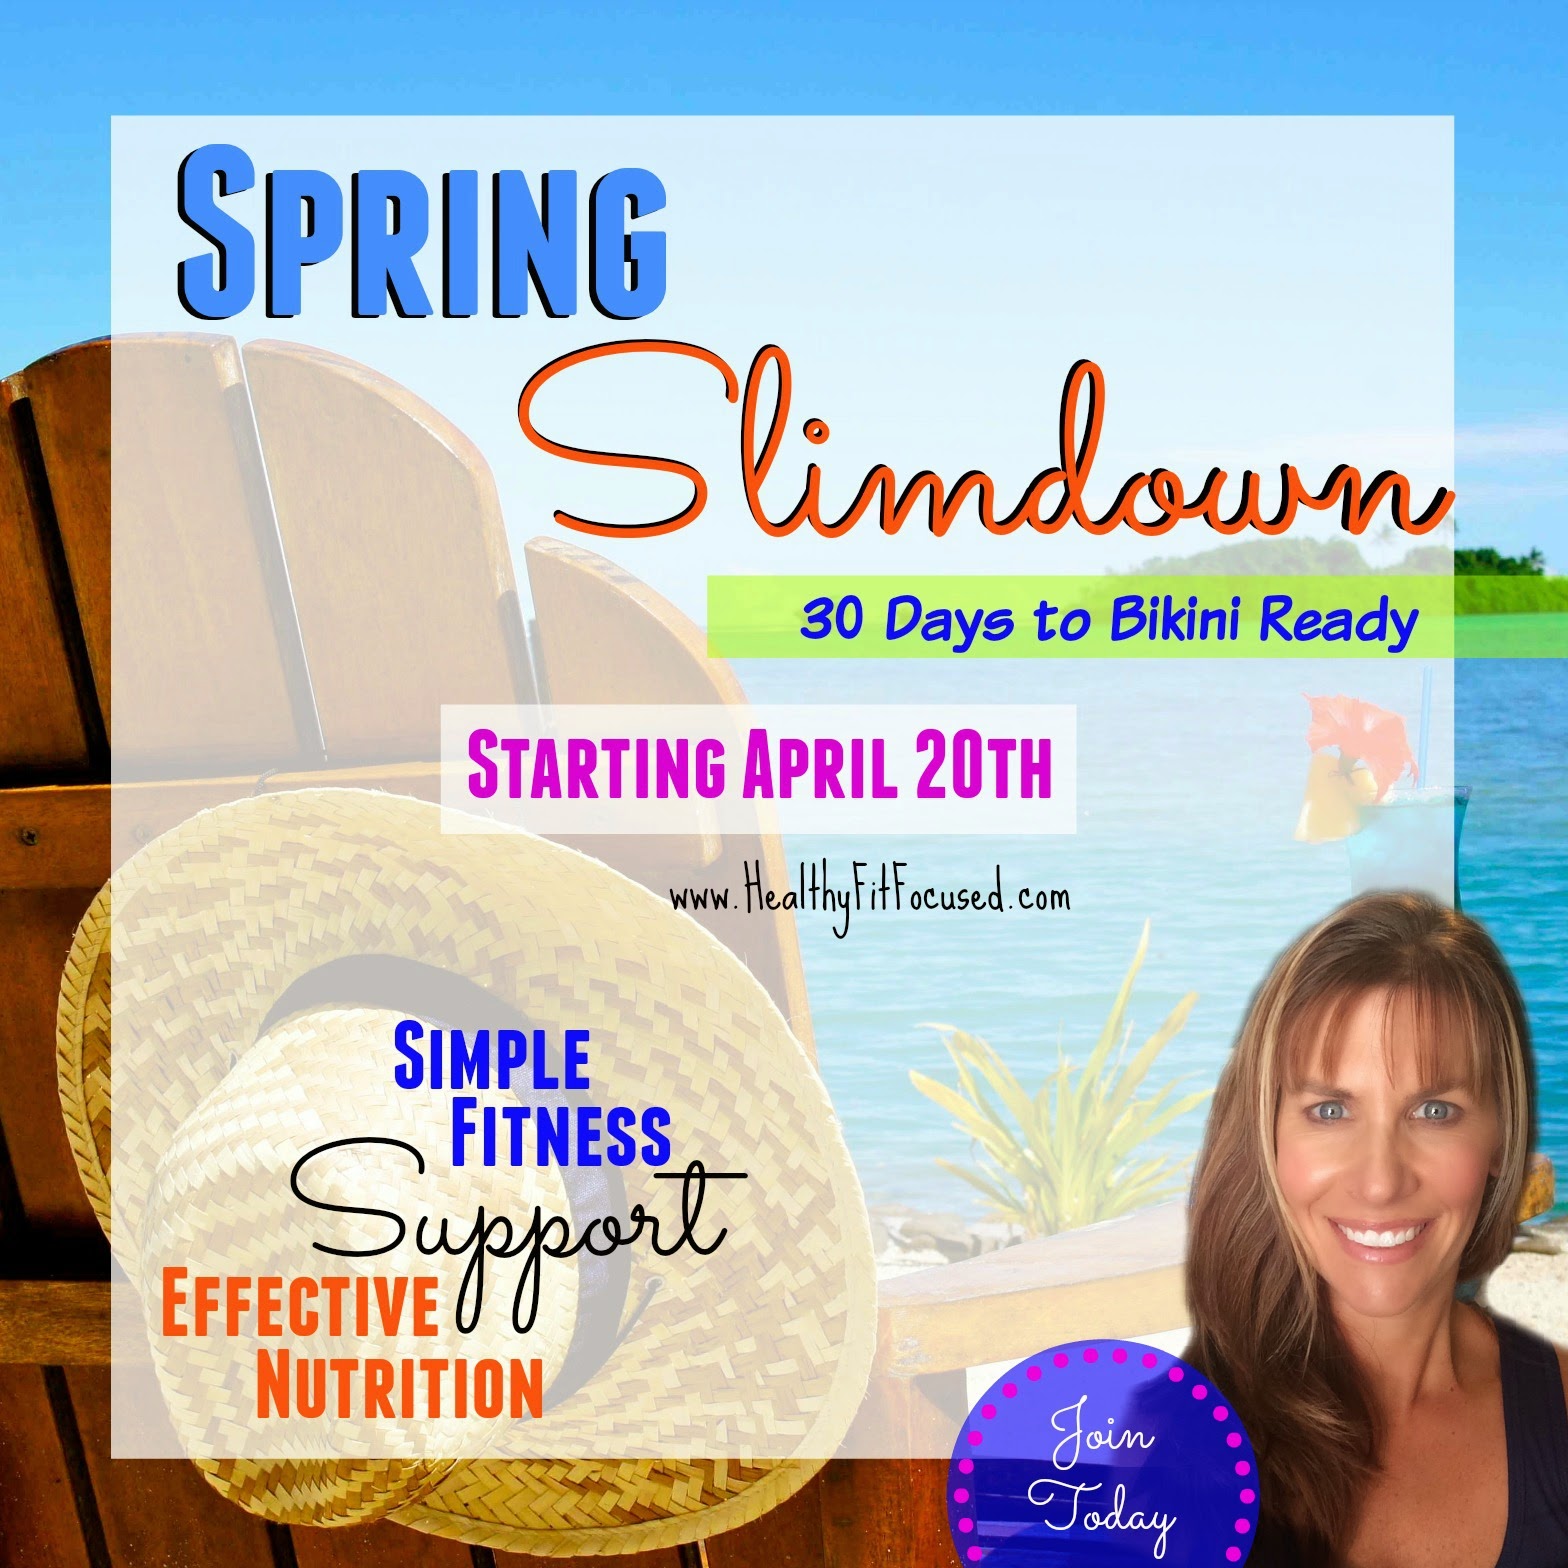 Muffin Top, Julie Little, Clean Eating, Spring Slim Down, 30 Days to Bikini Ready,  21 Day Fix, Max30, Support, Simple Fitness, Effective Nutrition